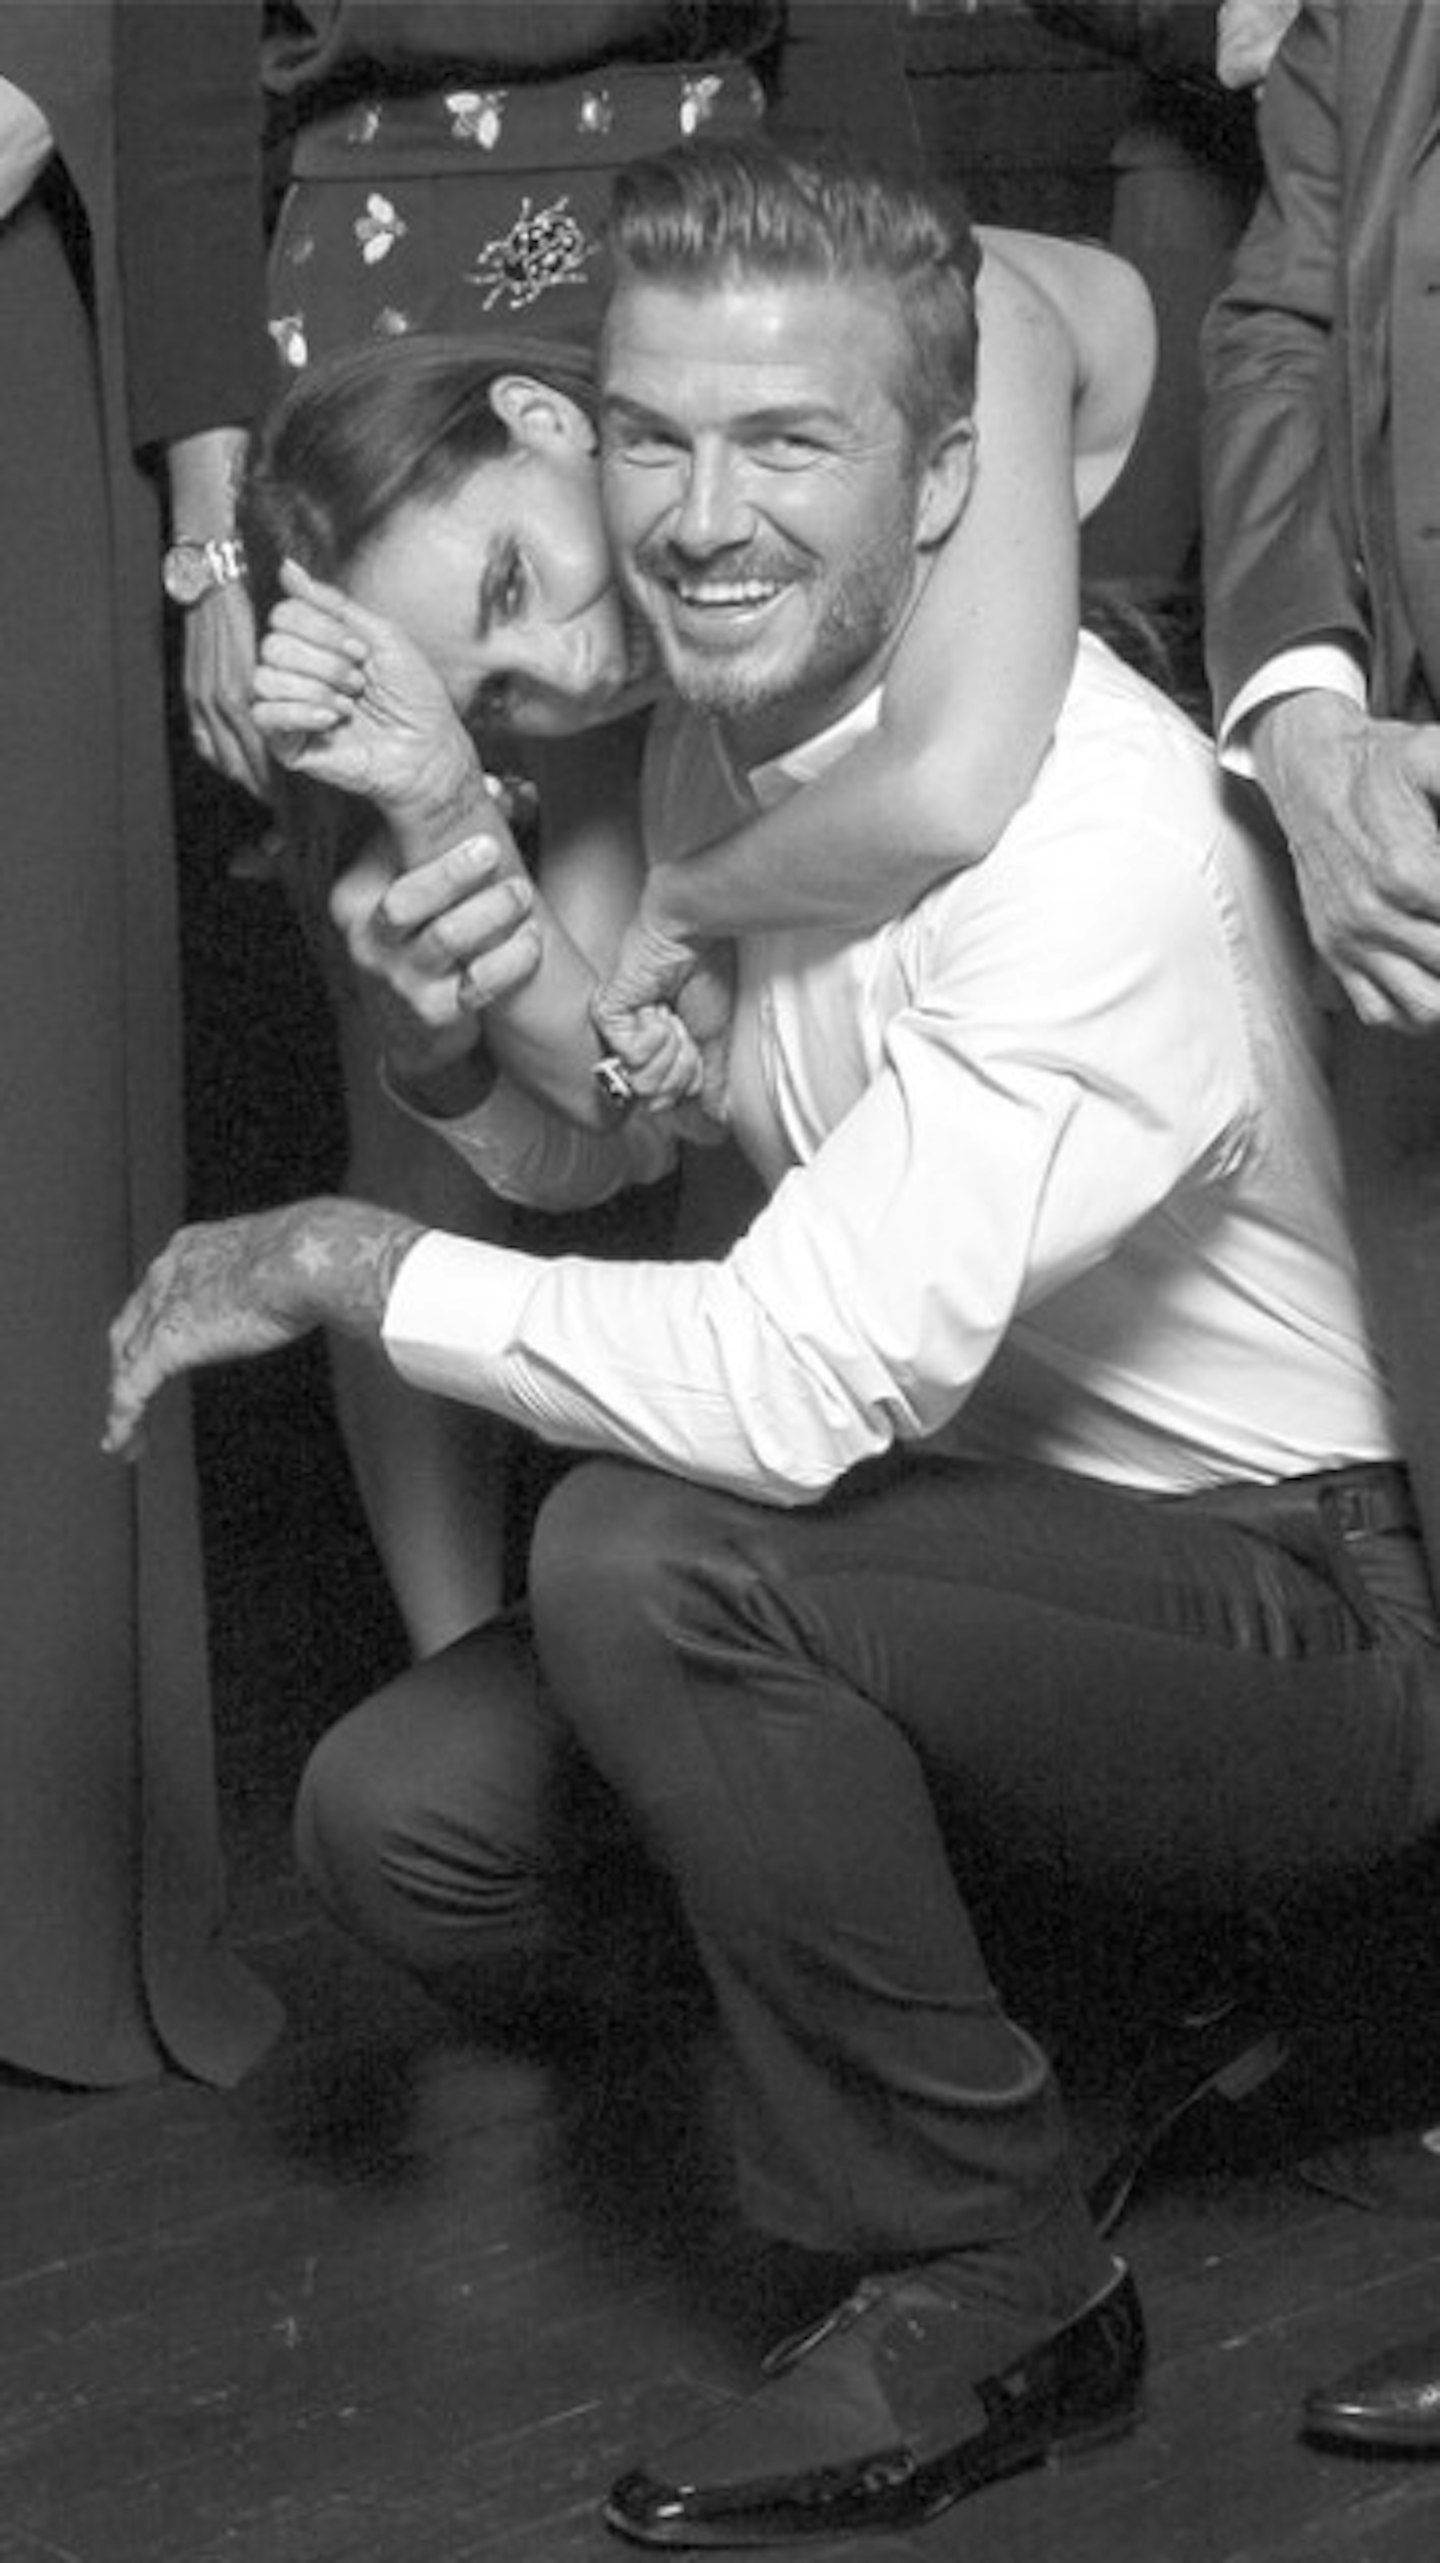 David Beckham Proves There's No Love Quite Like a Dad's Love for